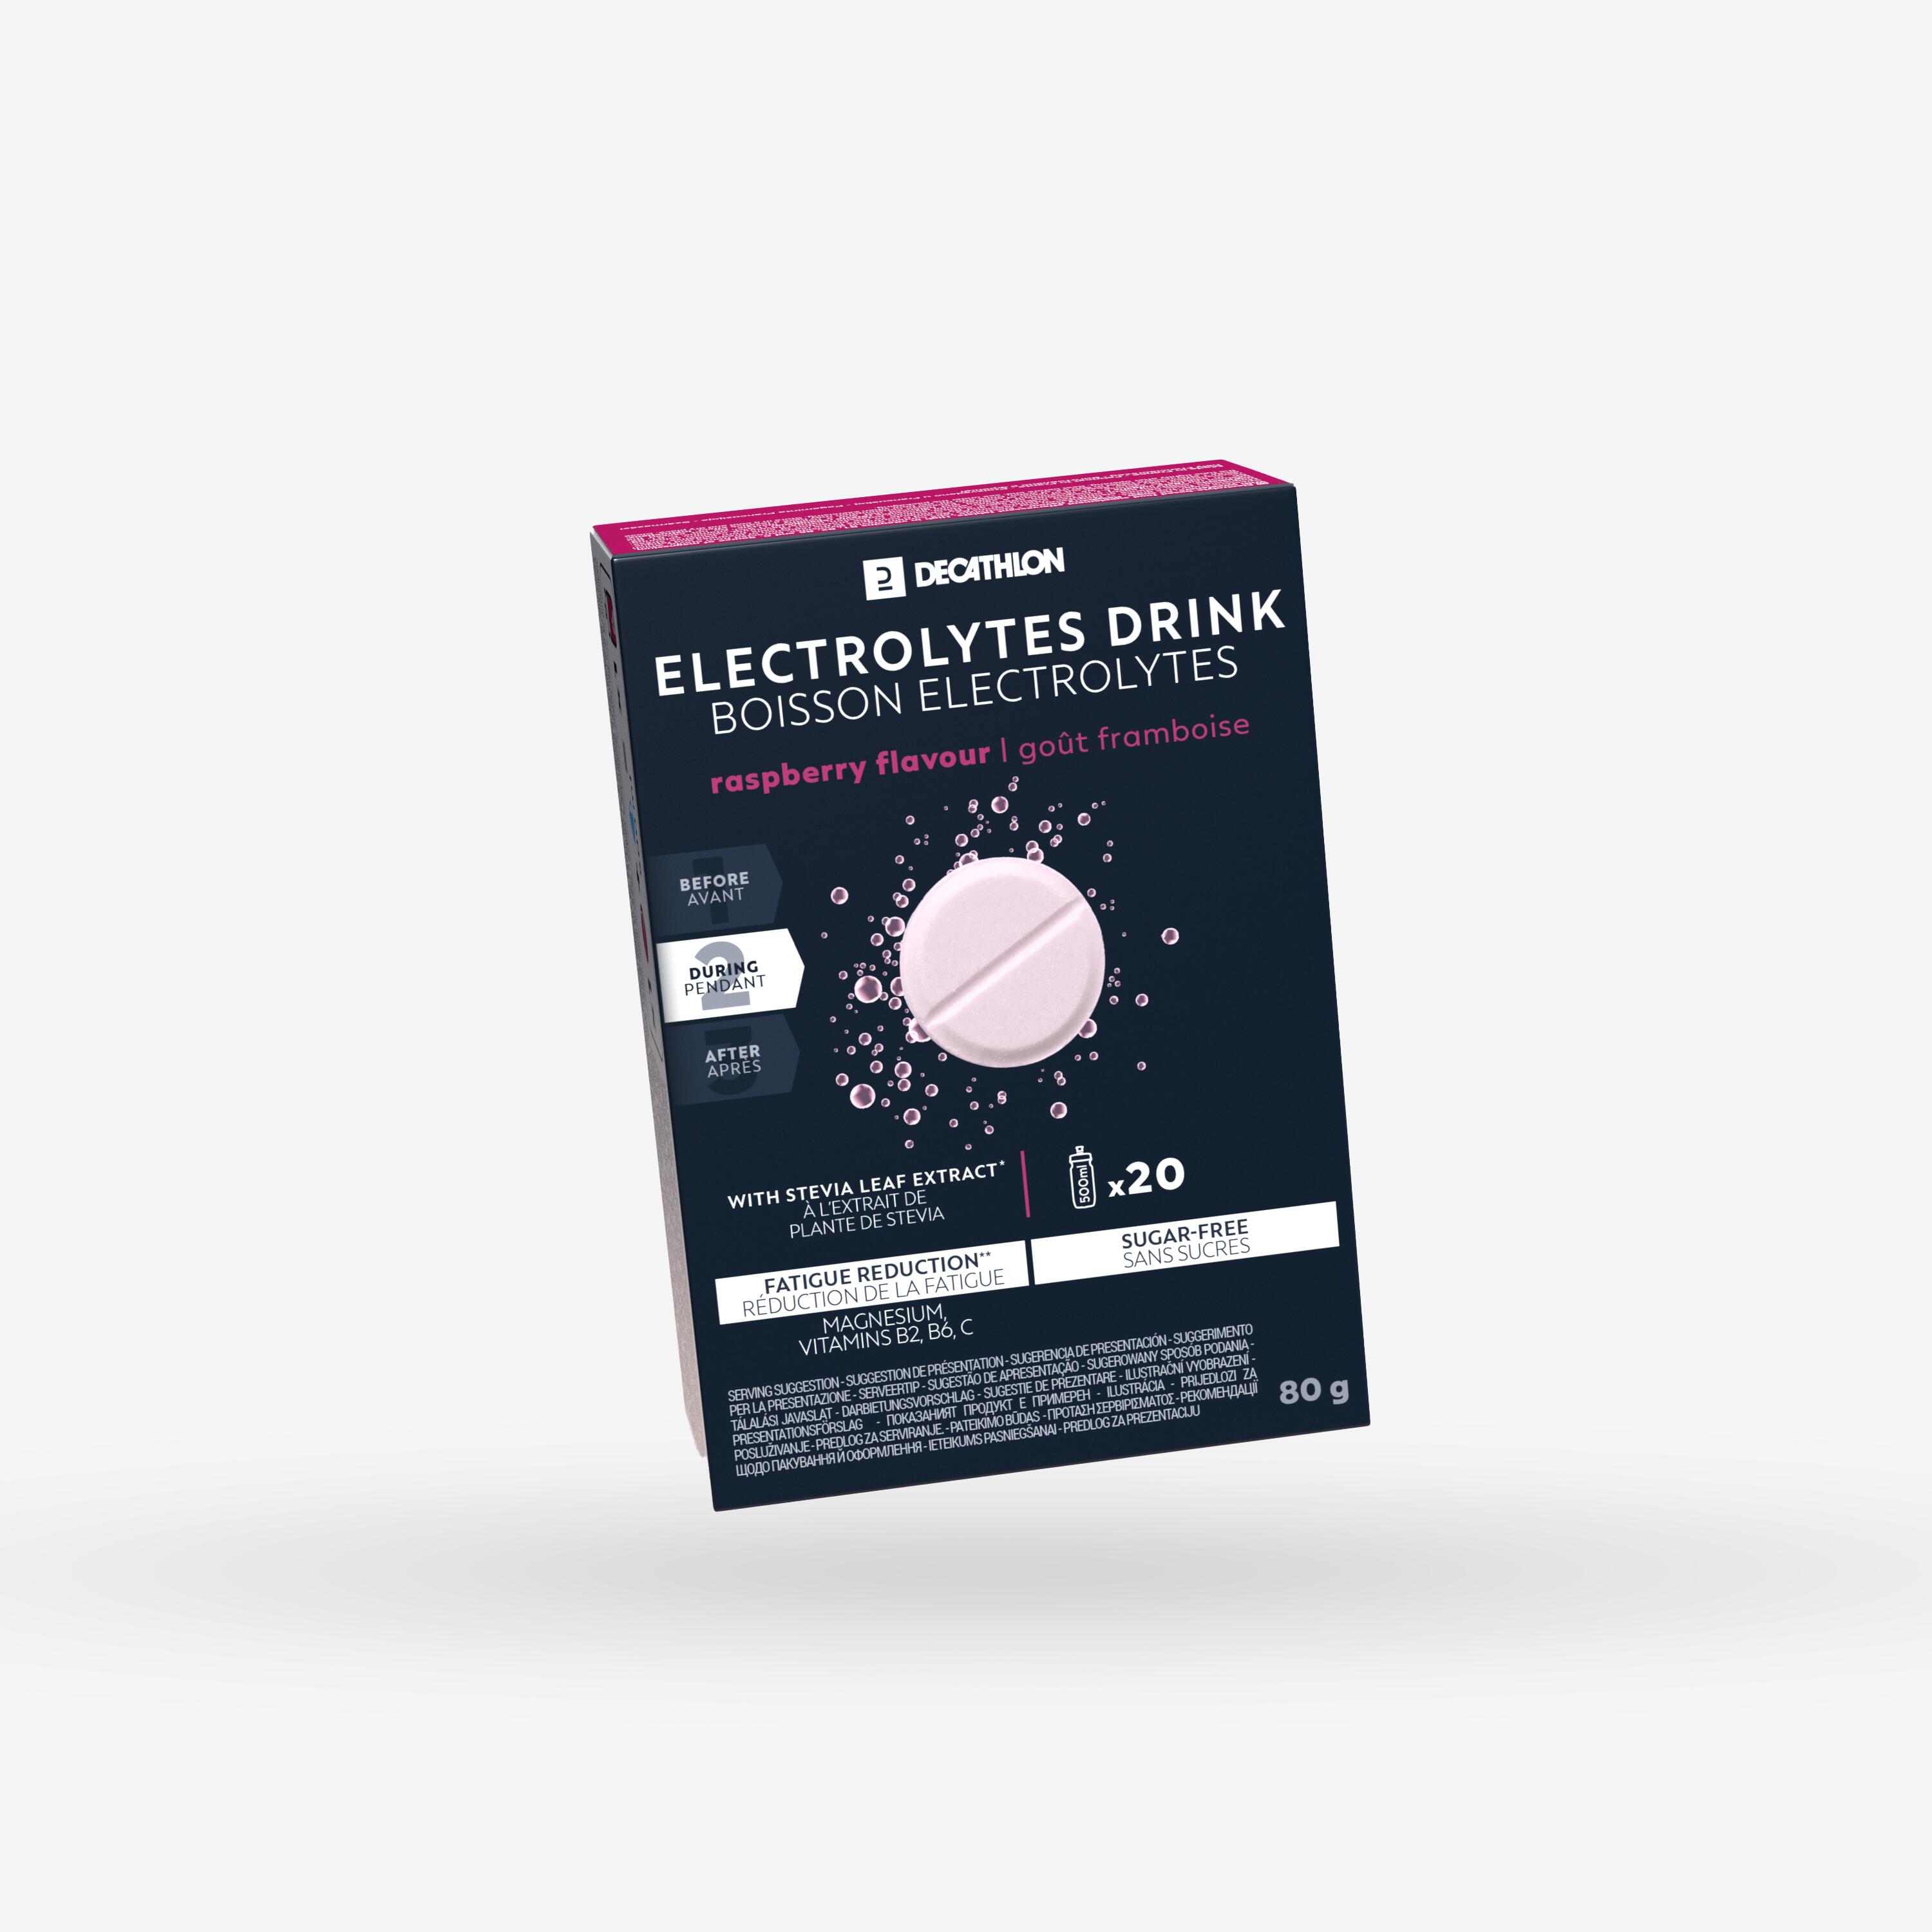 SUGAR-FREE ELECTROLYTES DRINK FIZZY TABLETS - MIXED BERRIES 20X4G 1/4